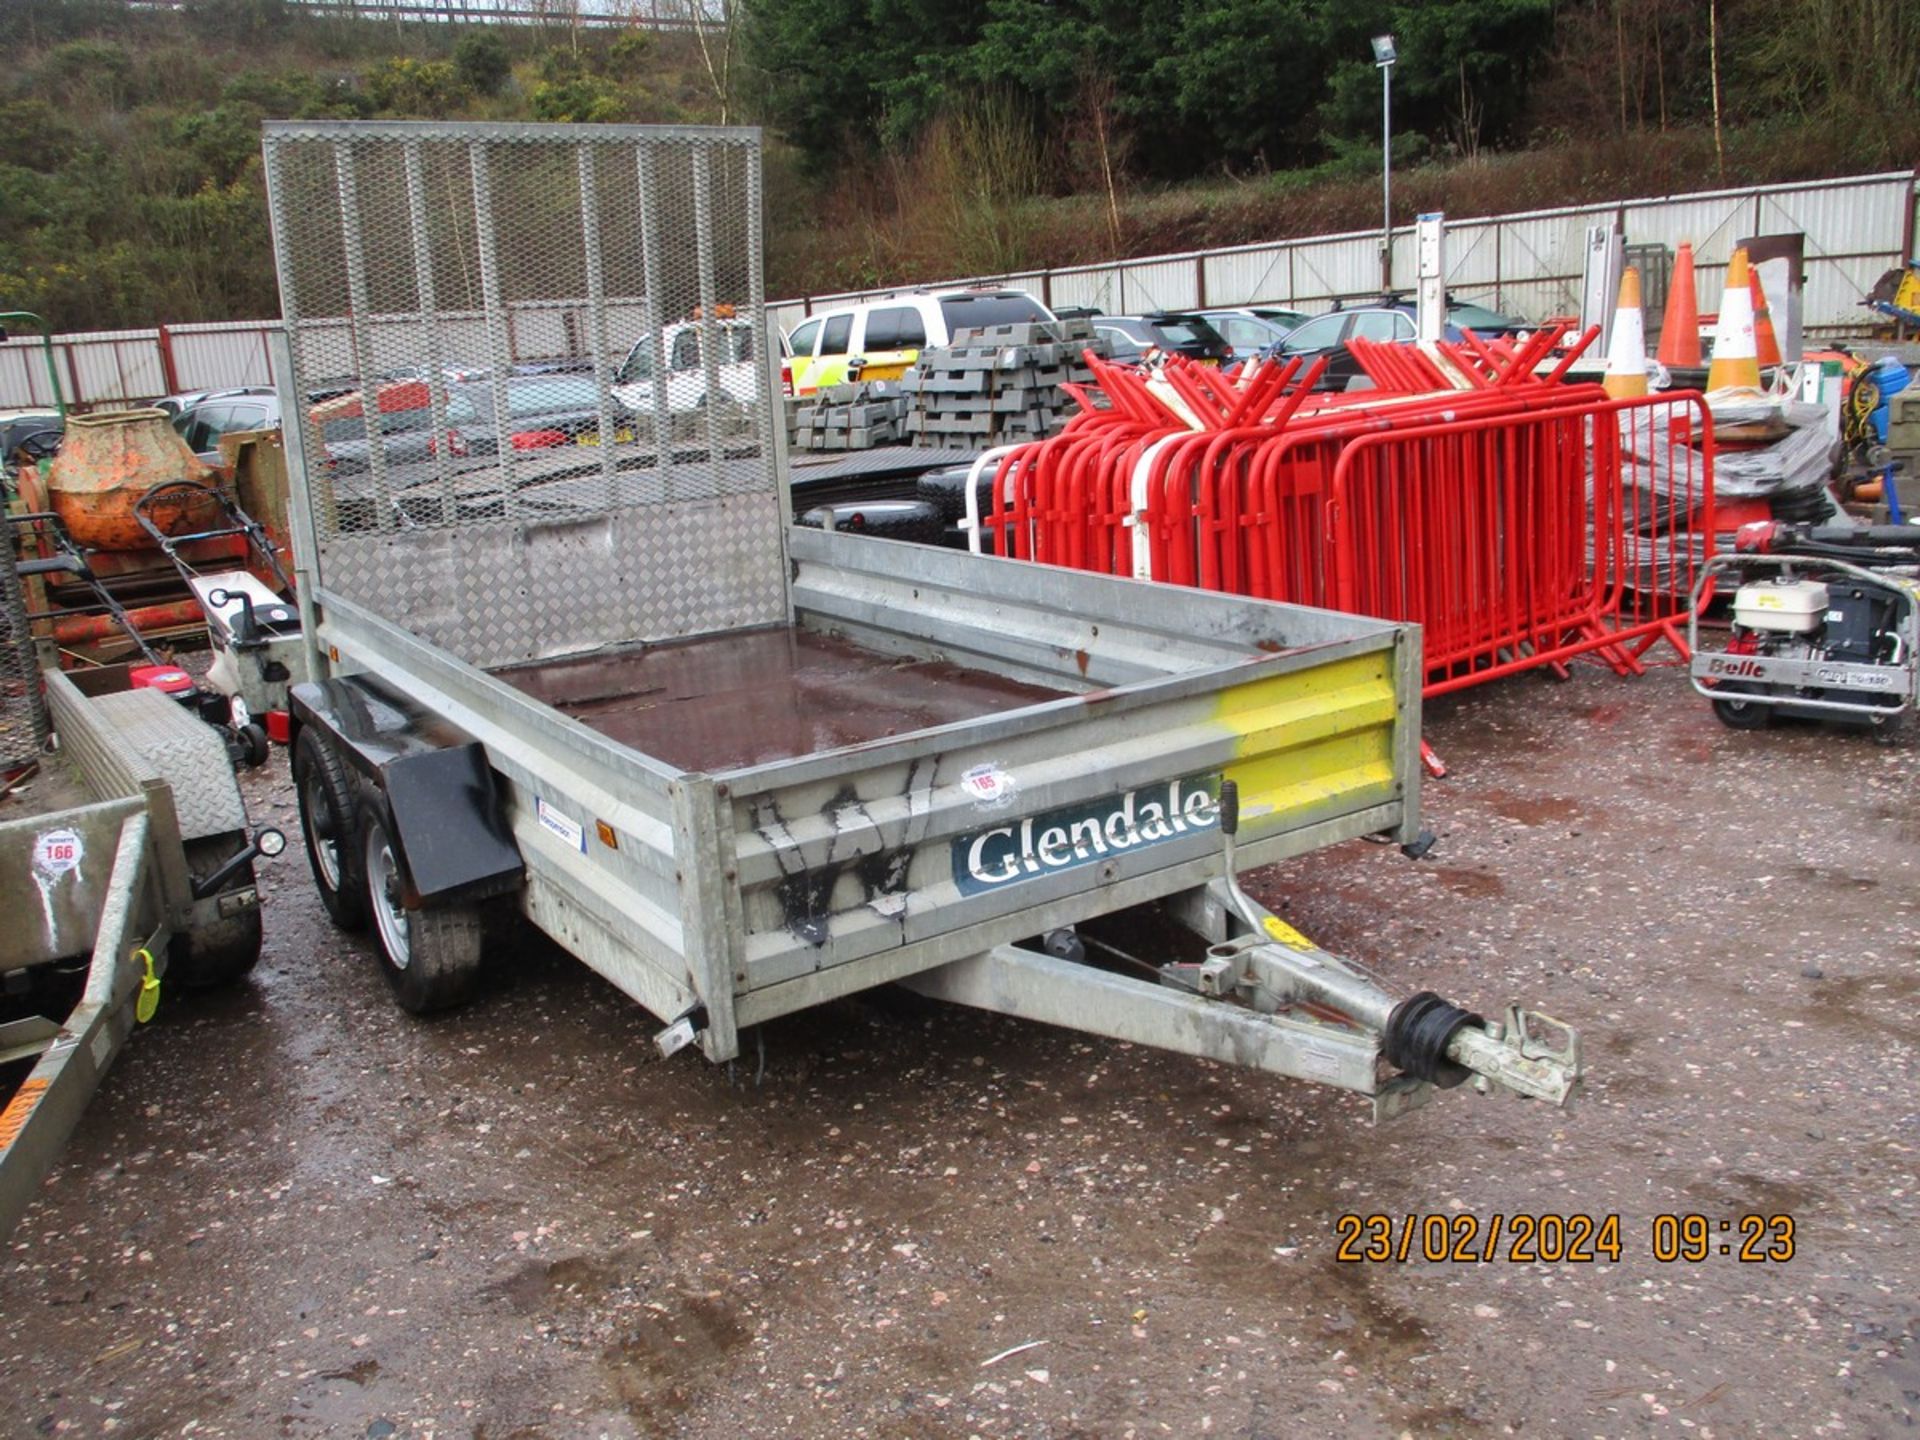 INDESPENSION TWIN AXLE PLANT TRAILER C.W FULL RAMP